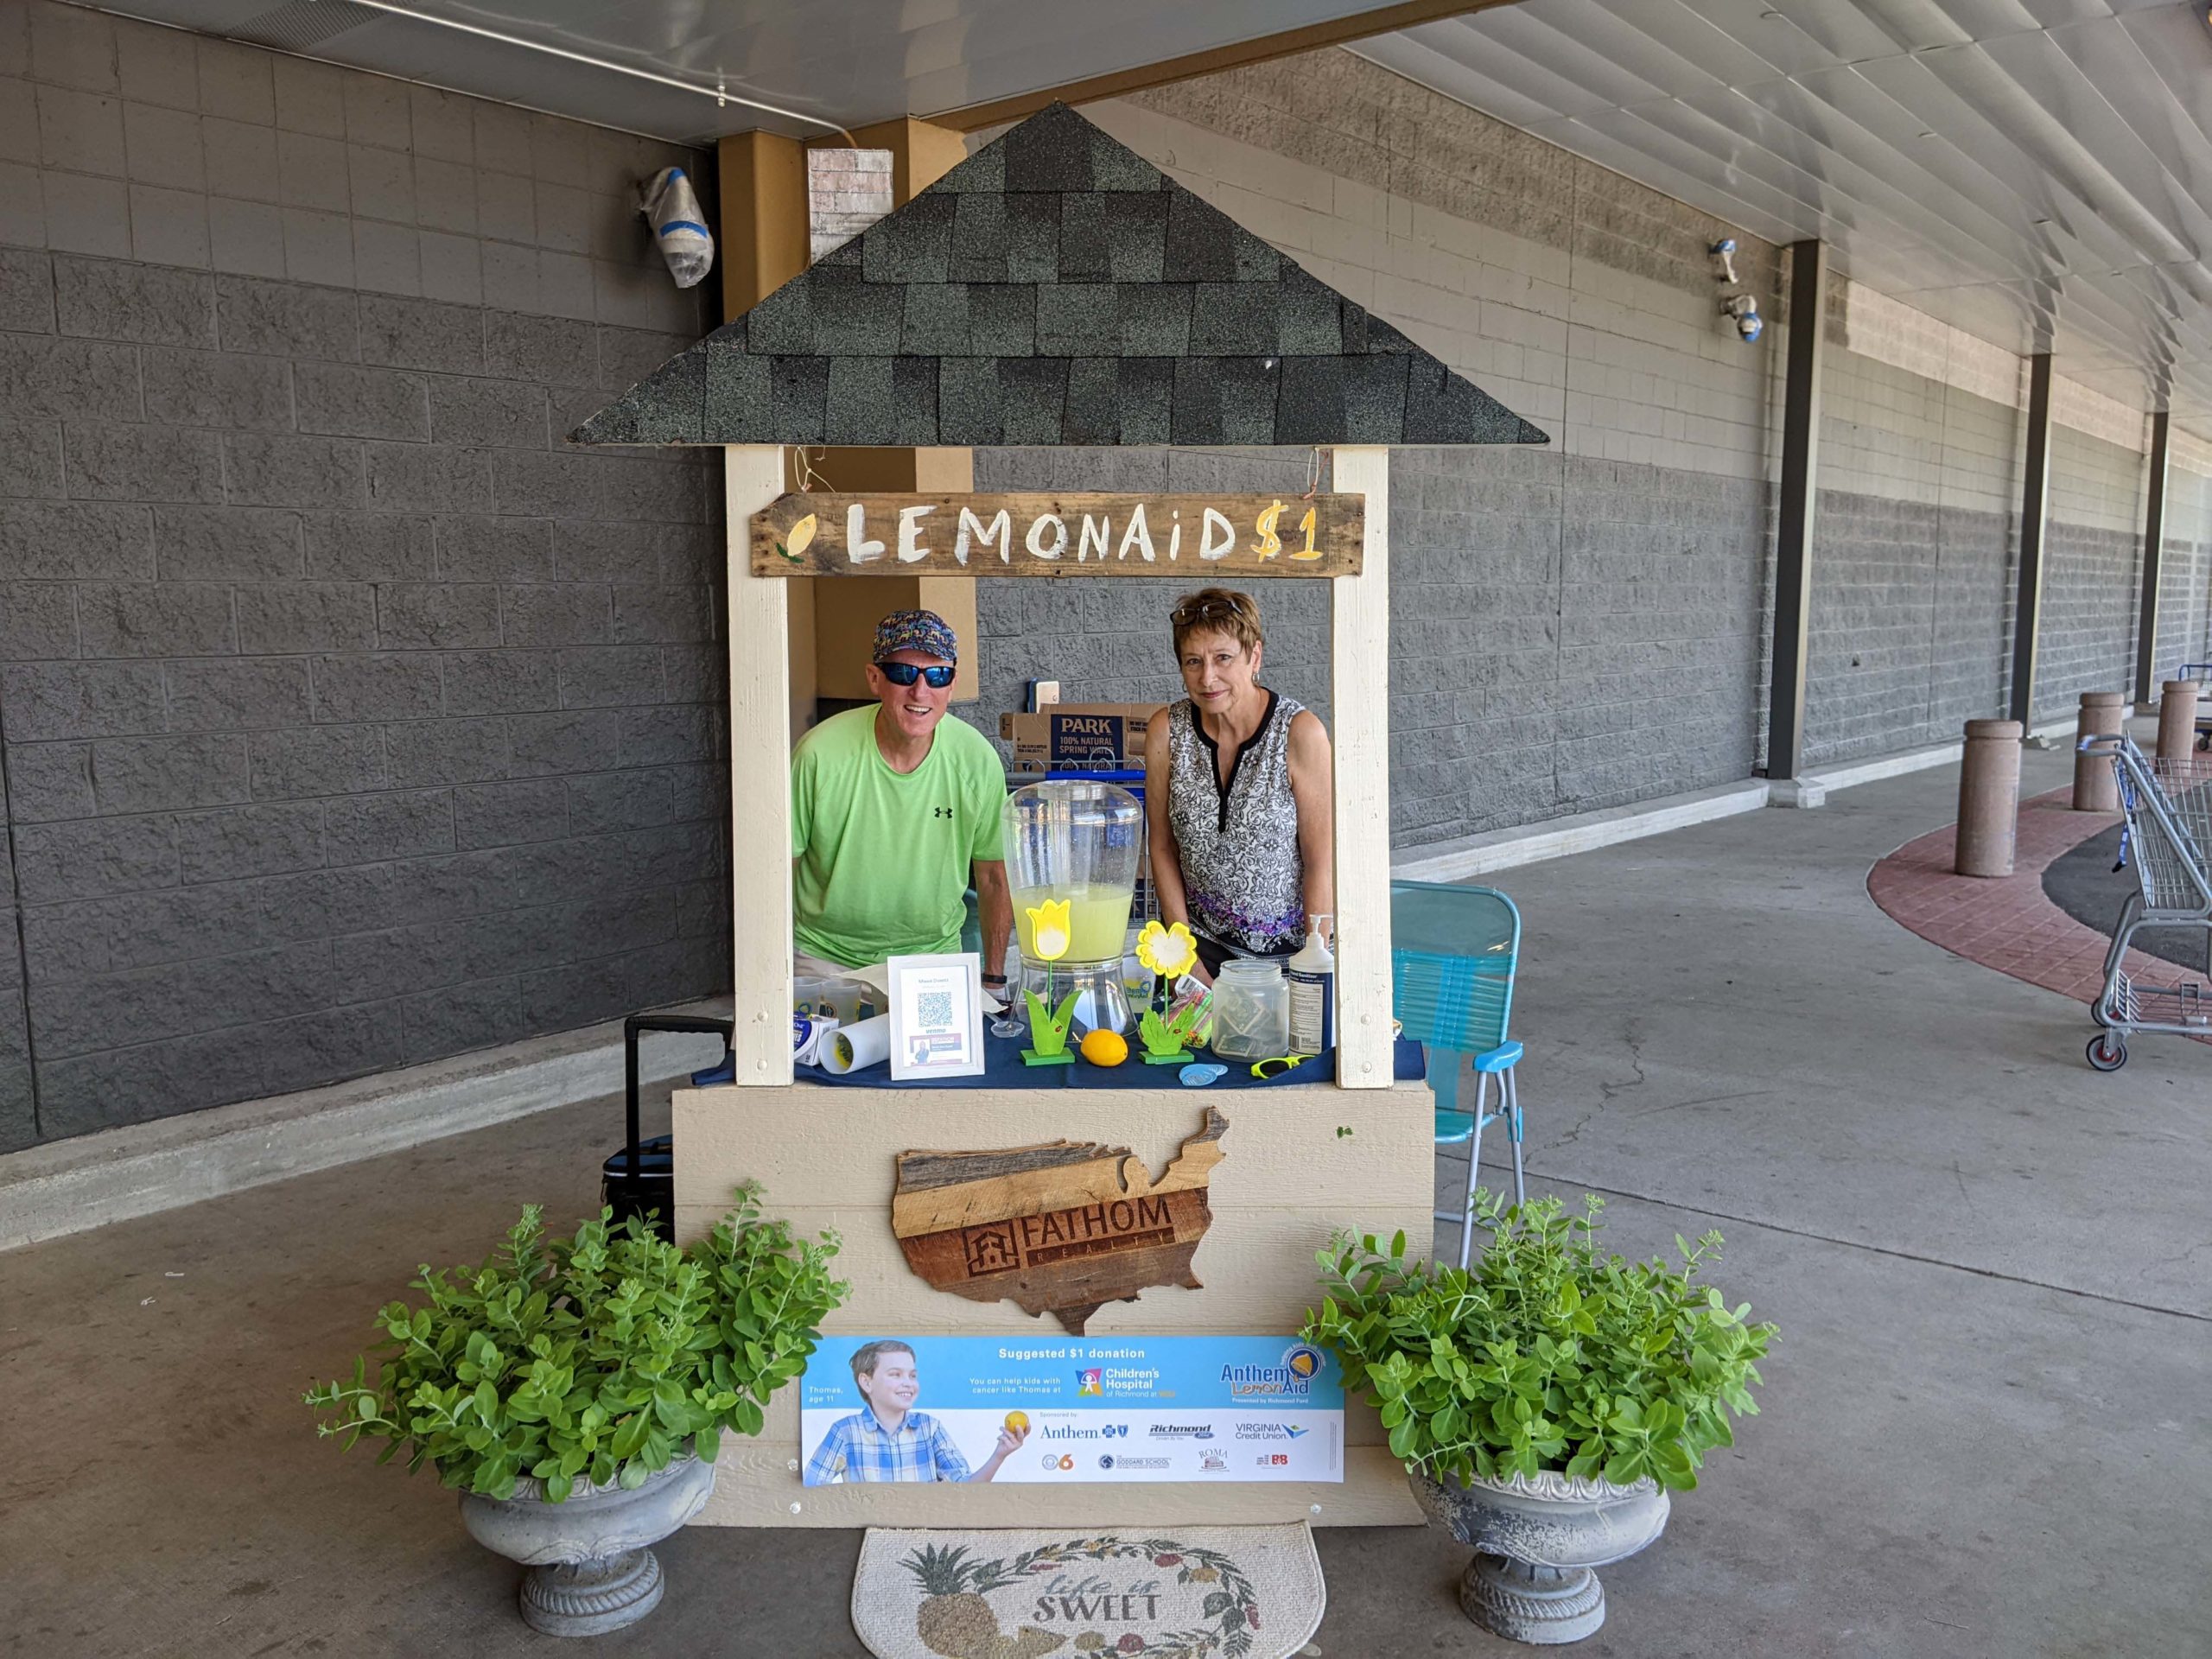 Realty Agents raising charity funds by selling lemonade